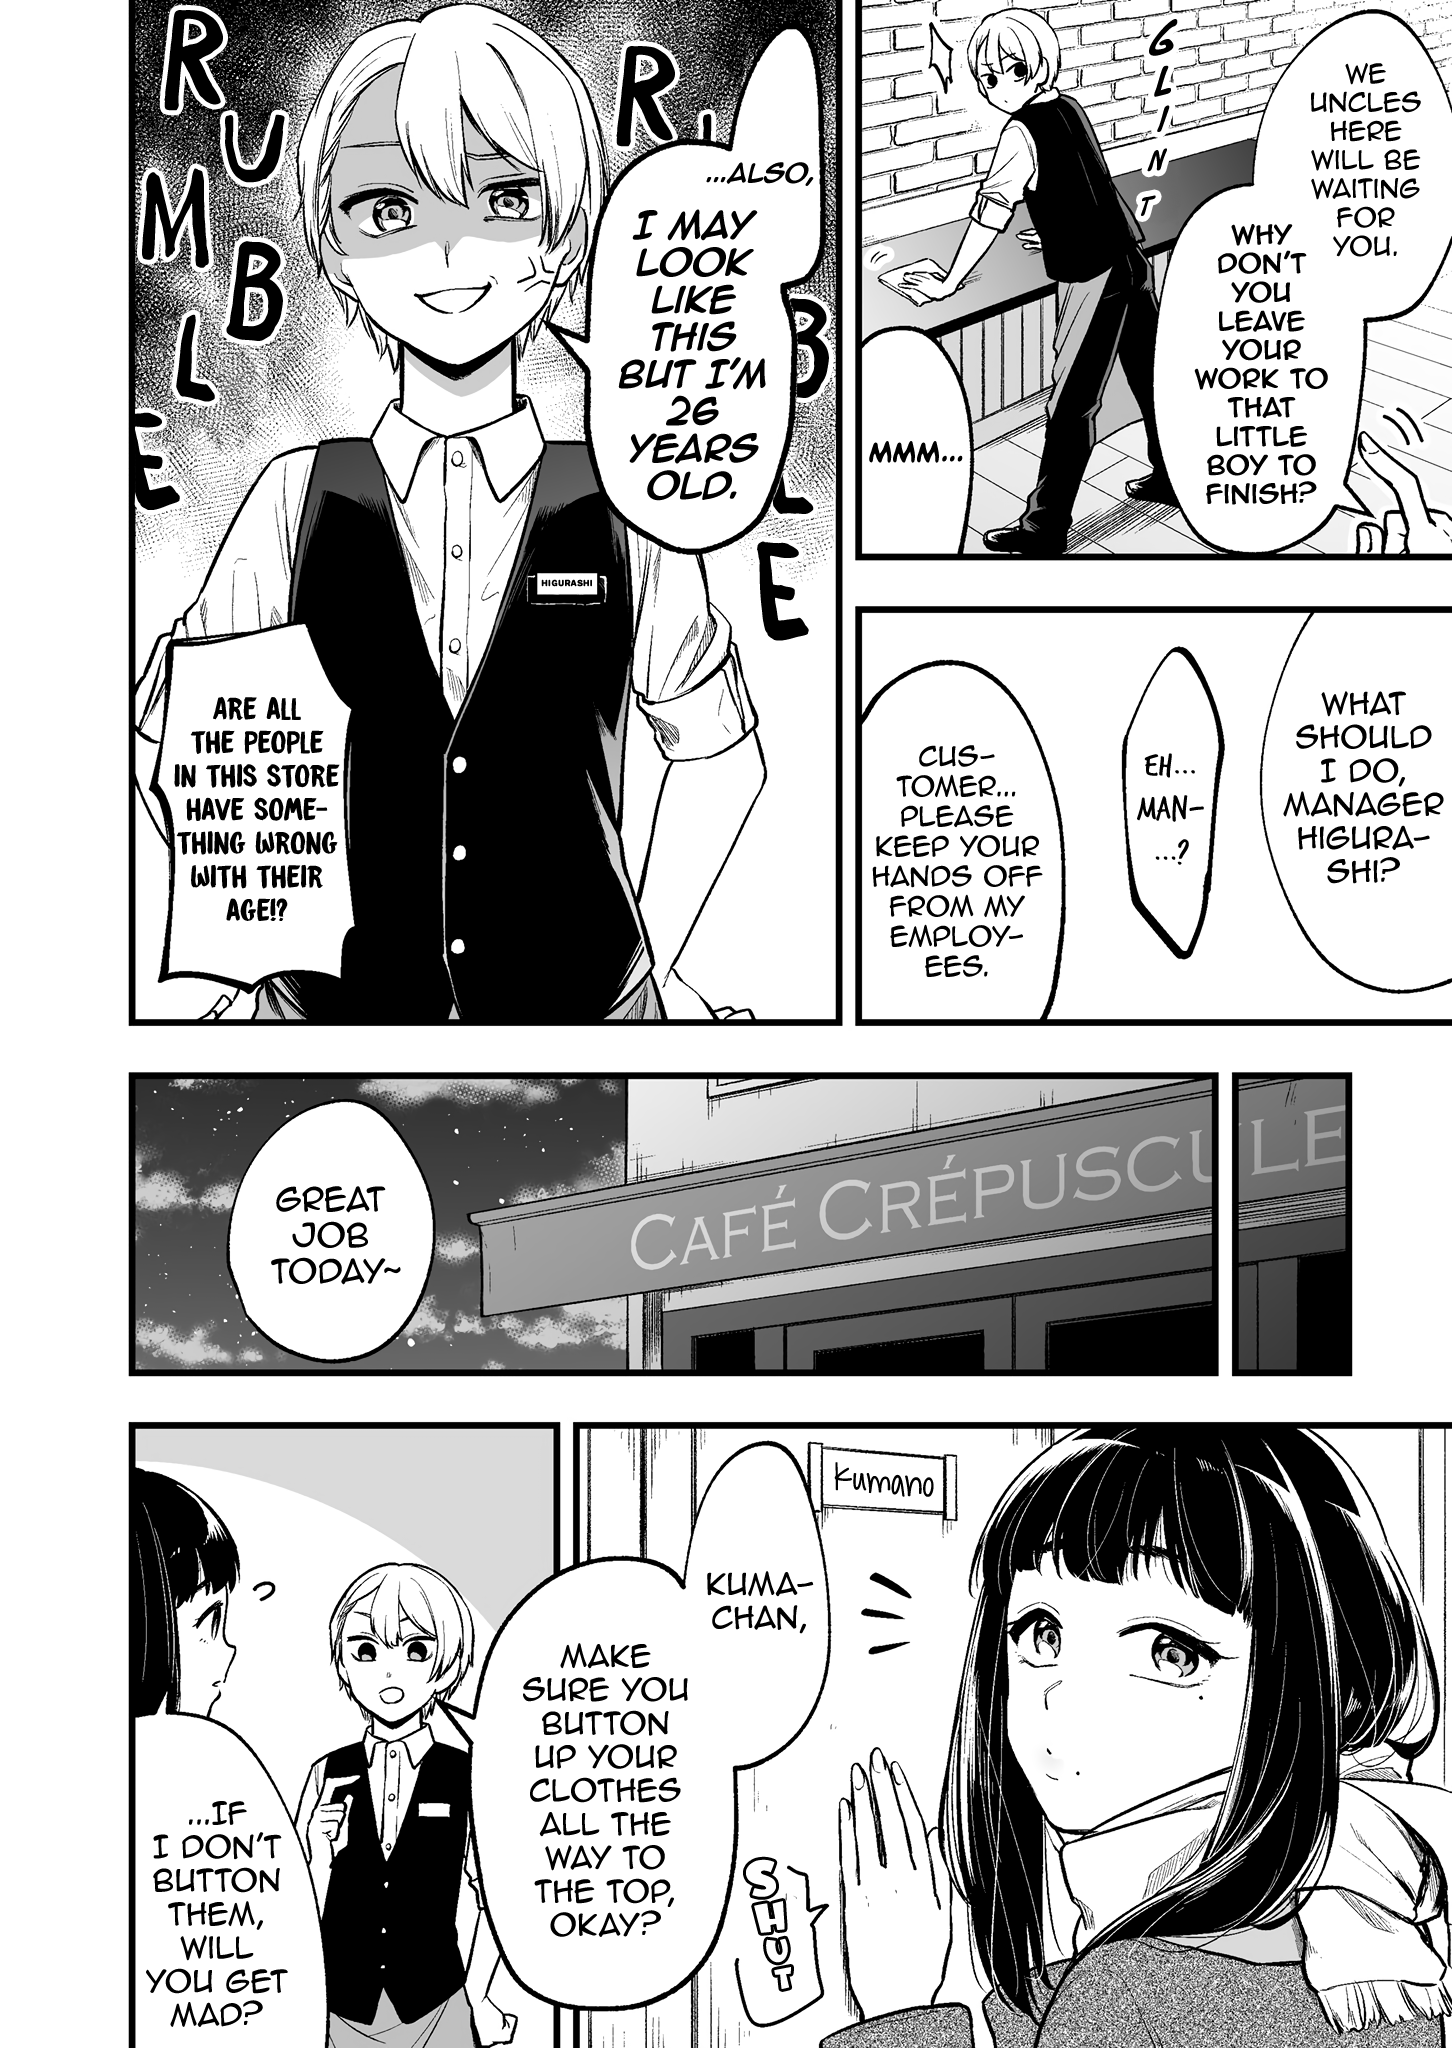 The Manager And The Oblivious Waitress Chapter 1: The Girl Is Oblivious To Her Surroundings - Picture 3